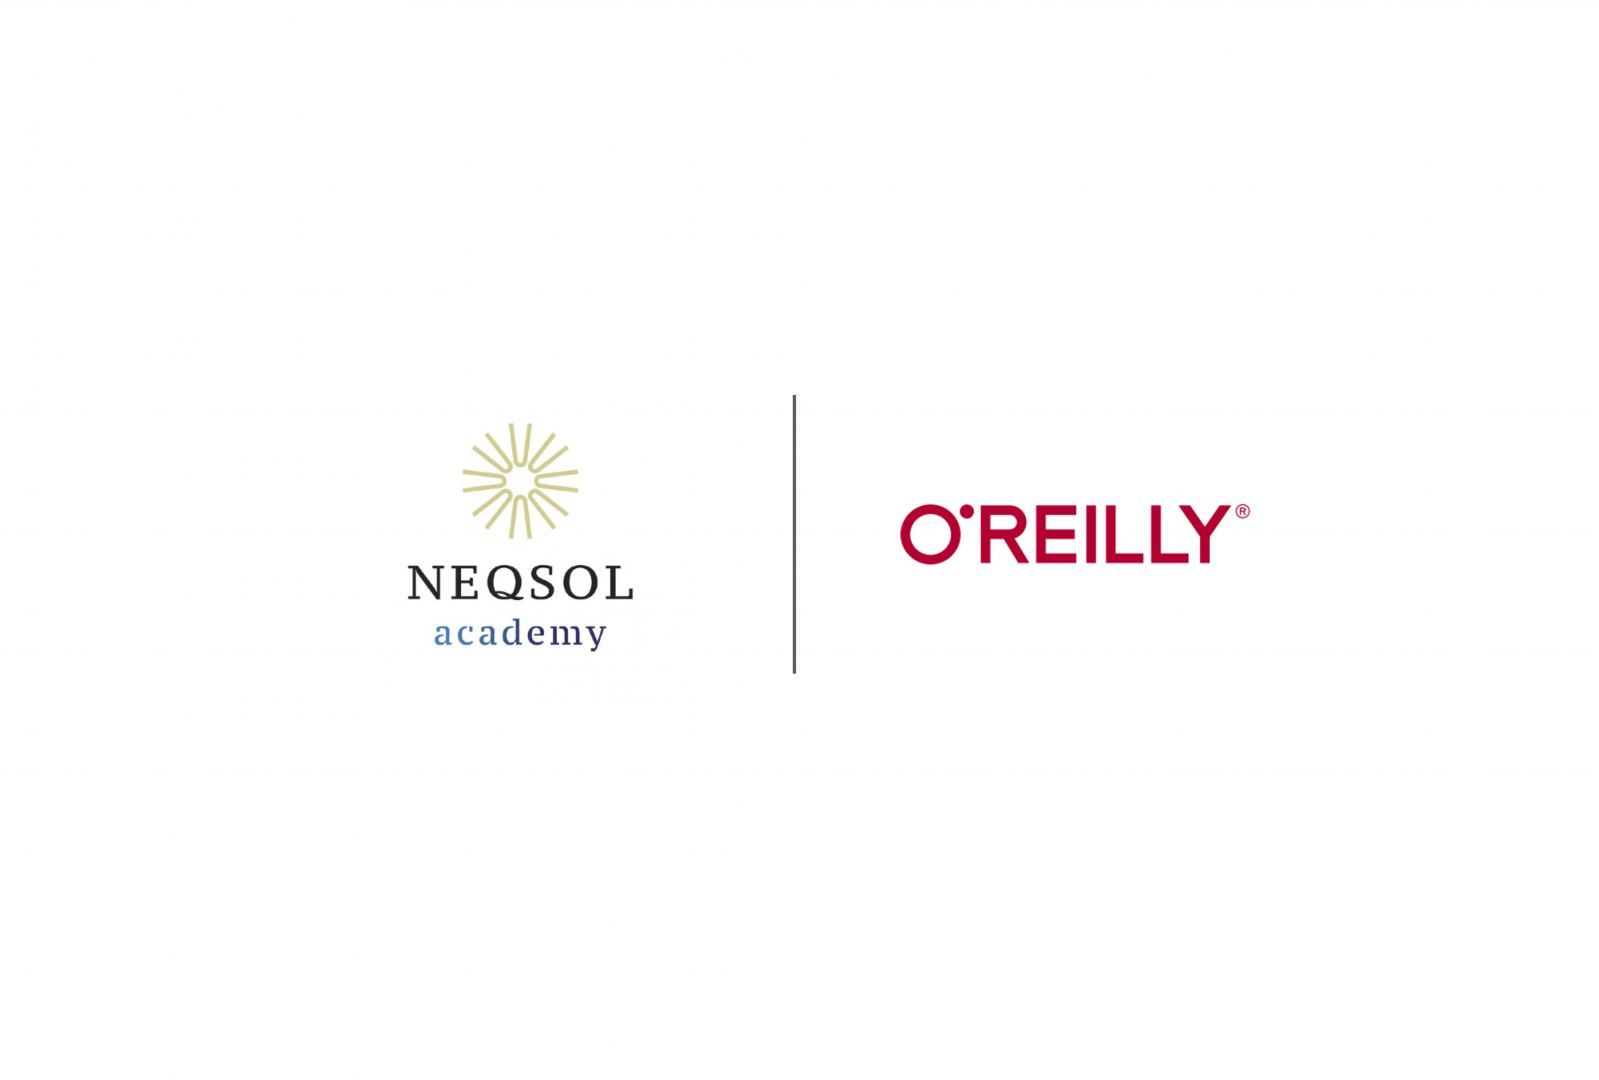 NEQSOL Holding announces partnership with global training provider O'Reilly